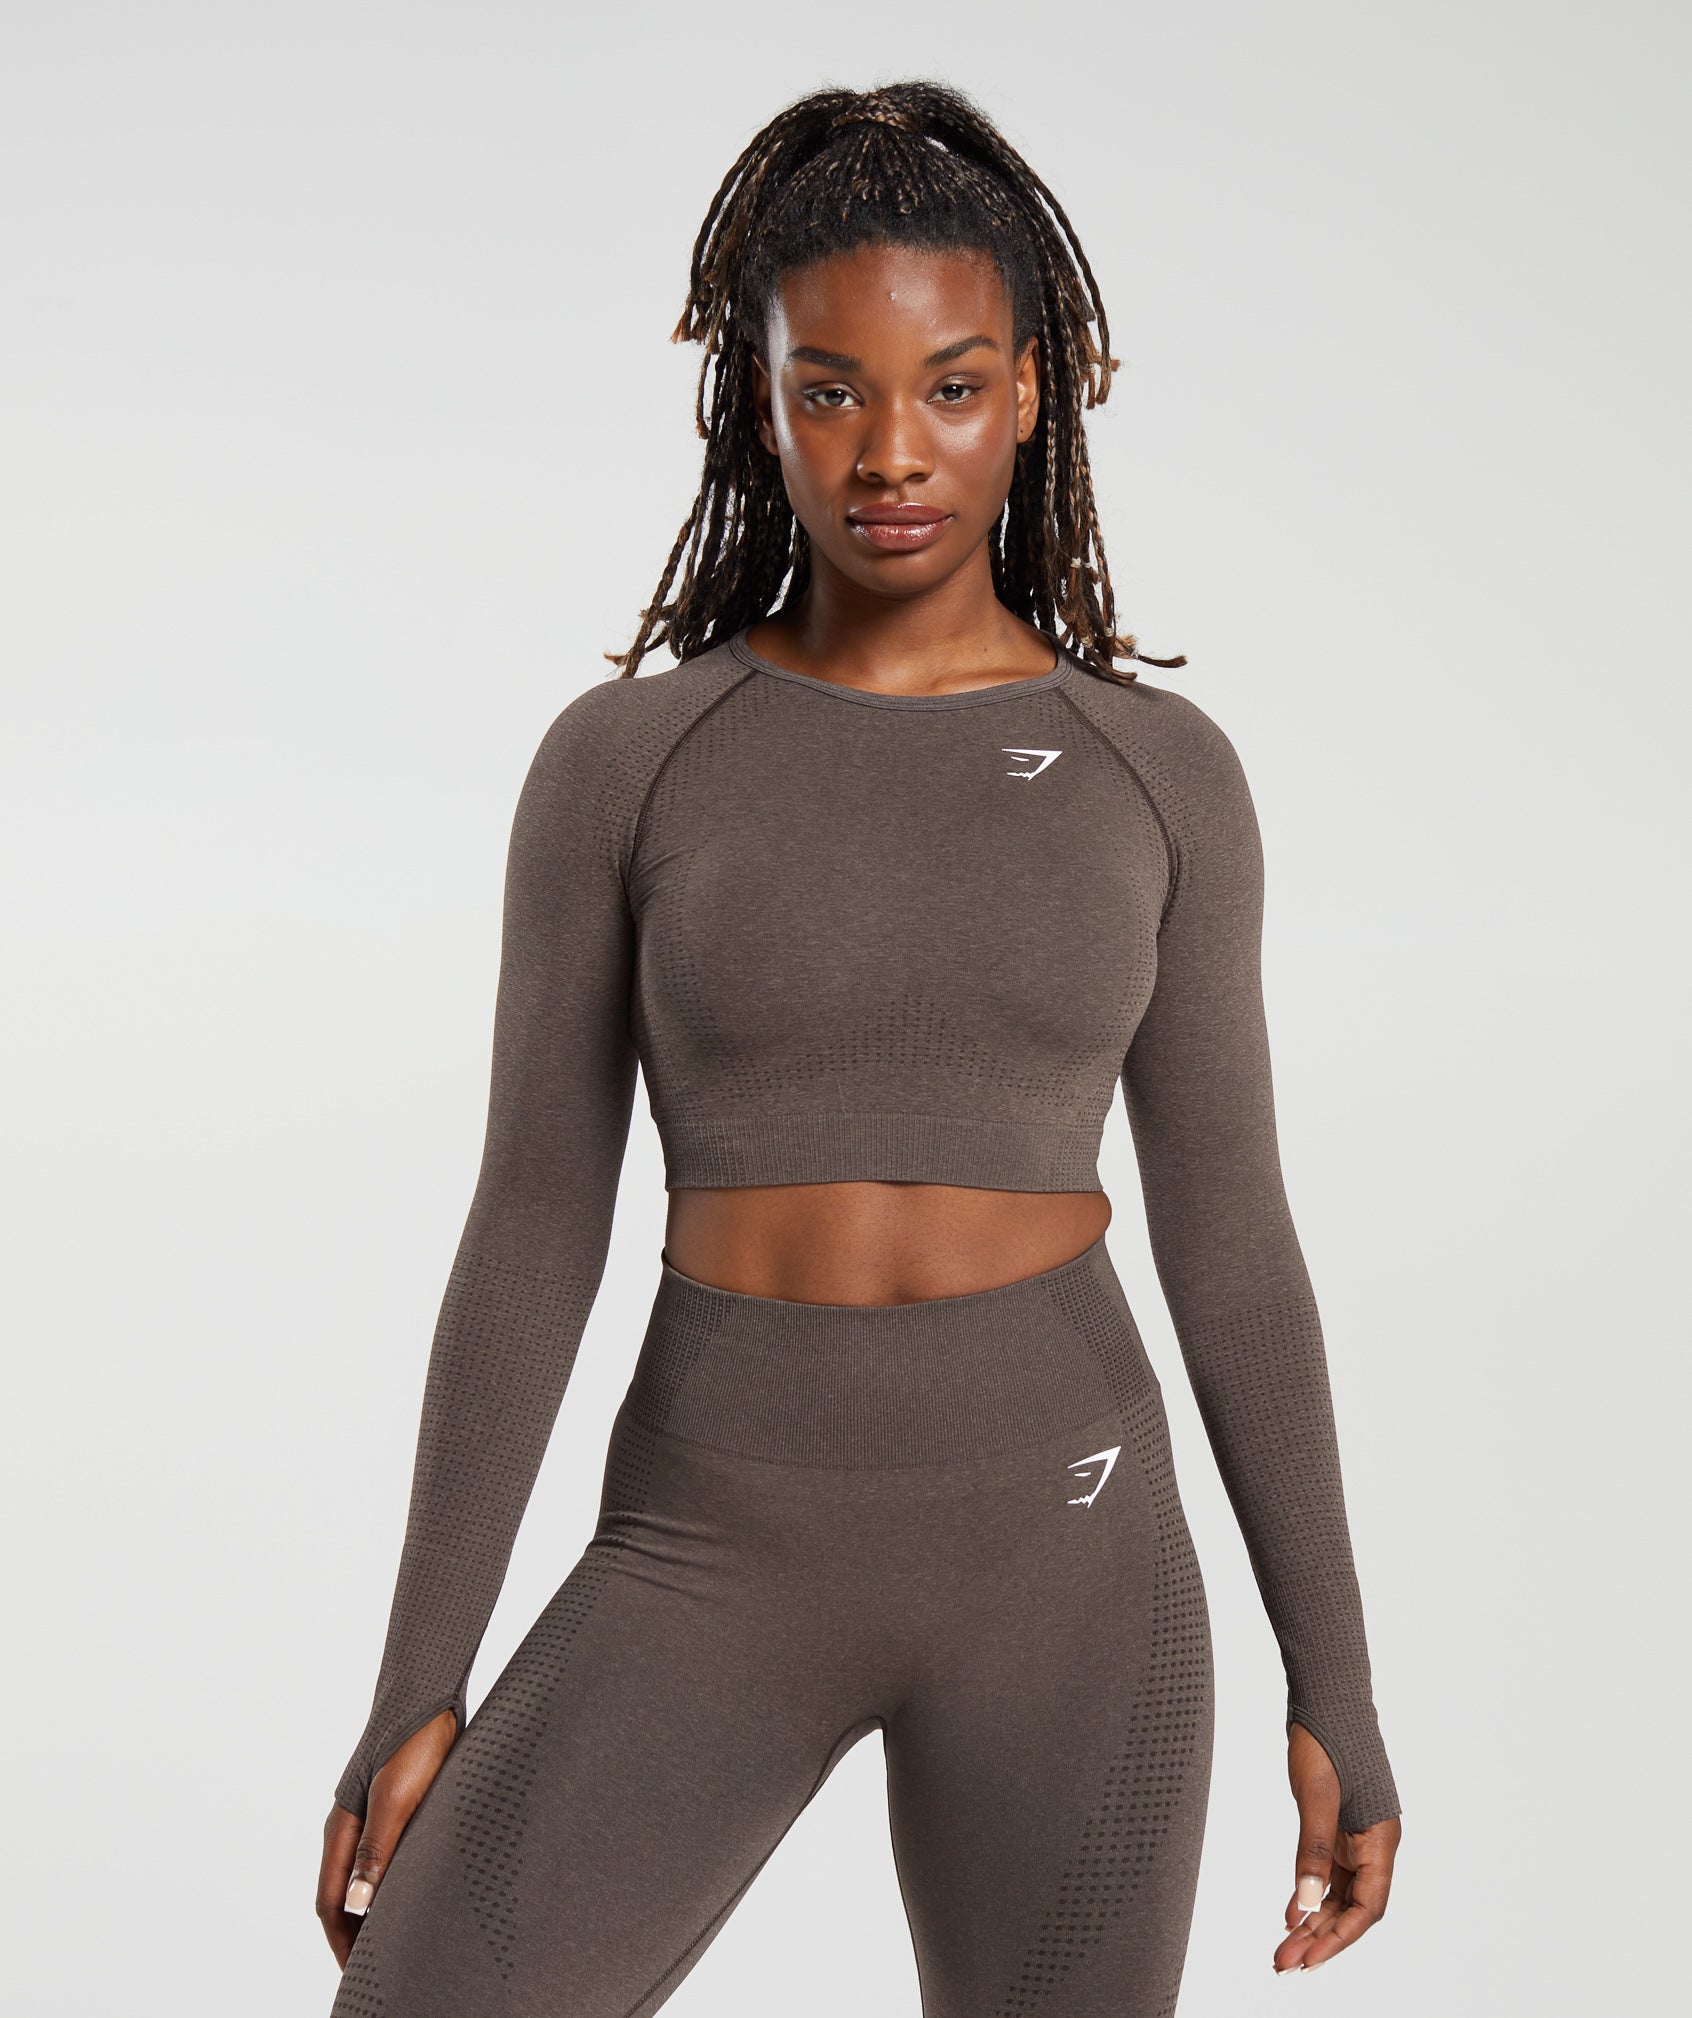 Vital Seamless Clothing Collection - Gymshark